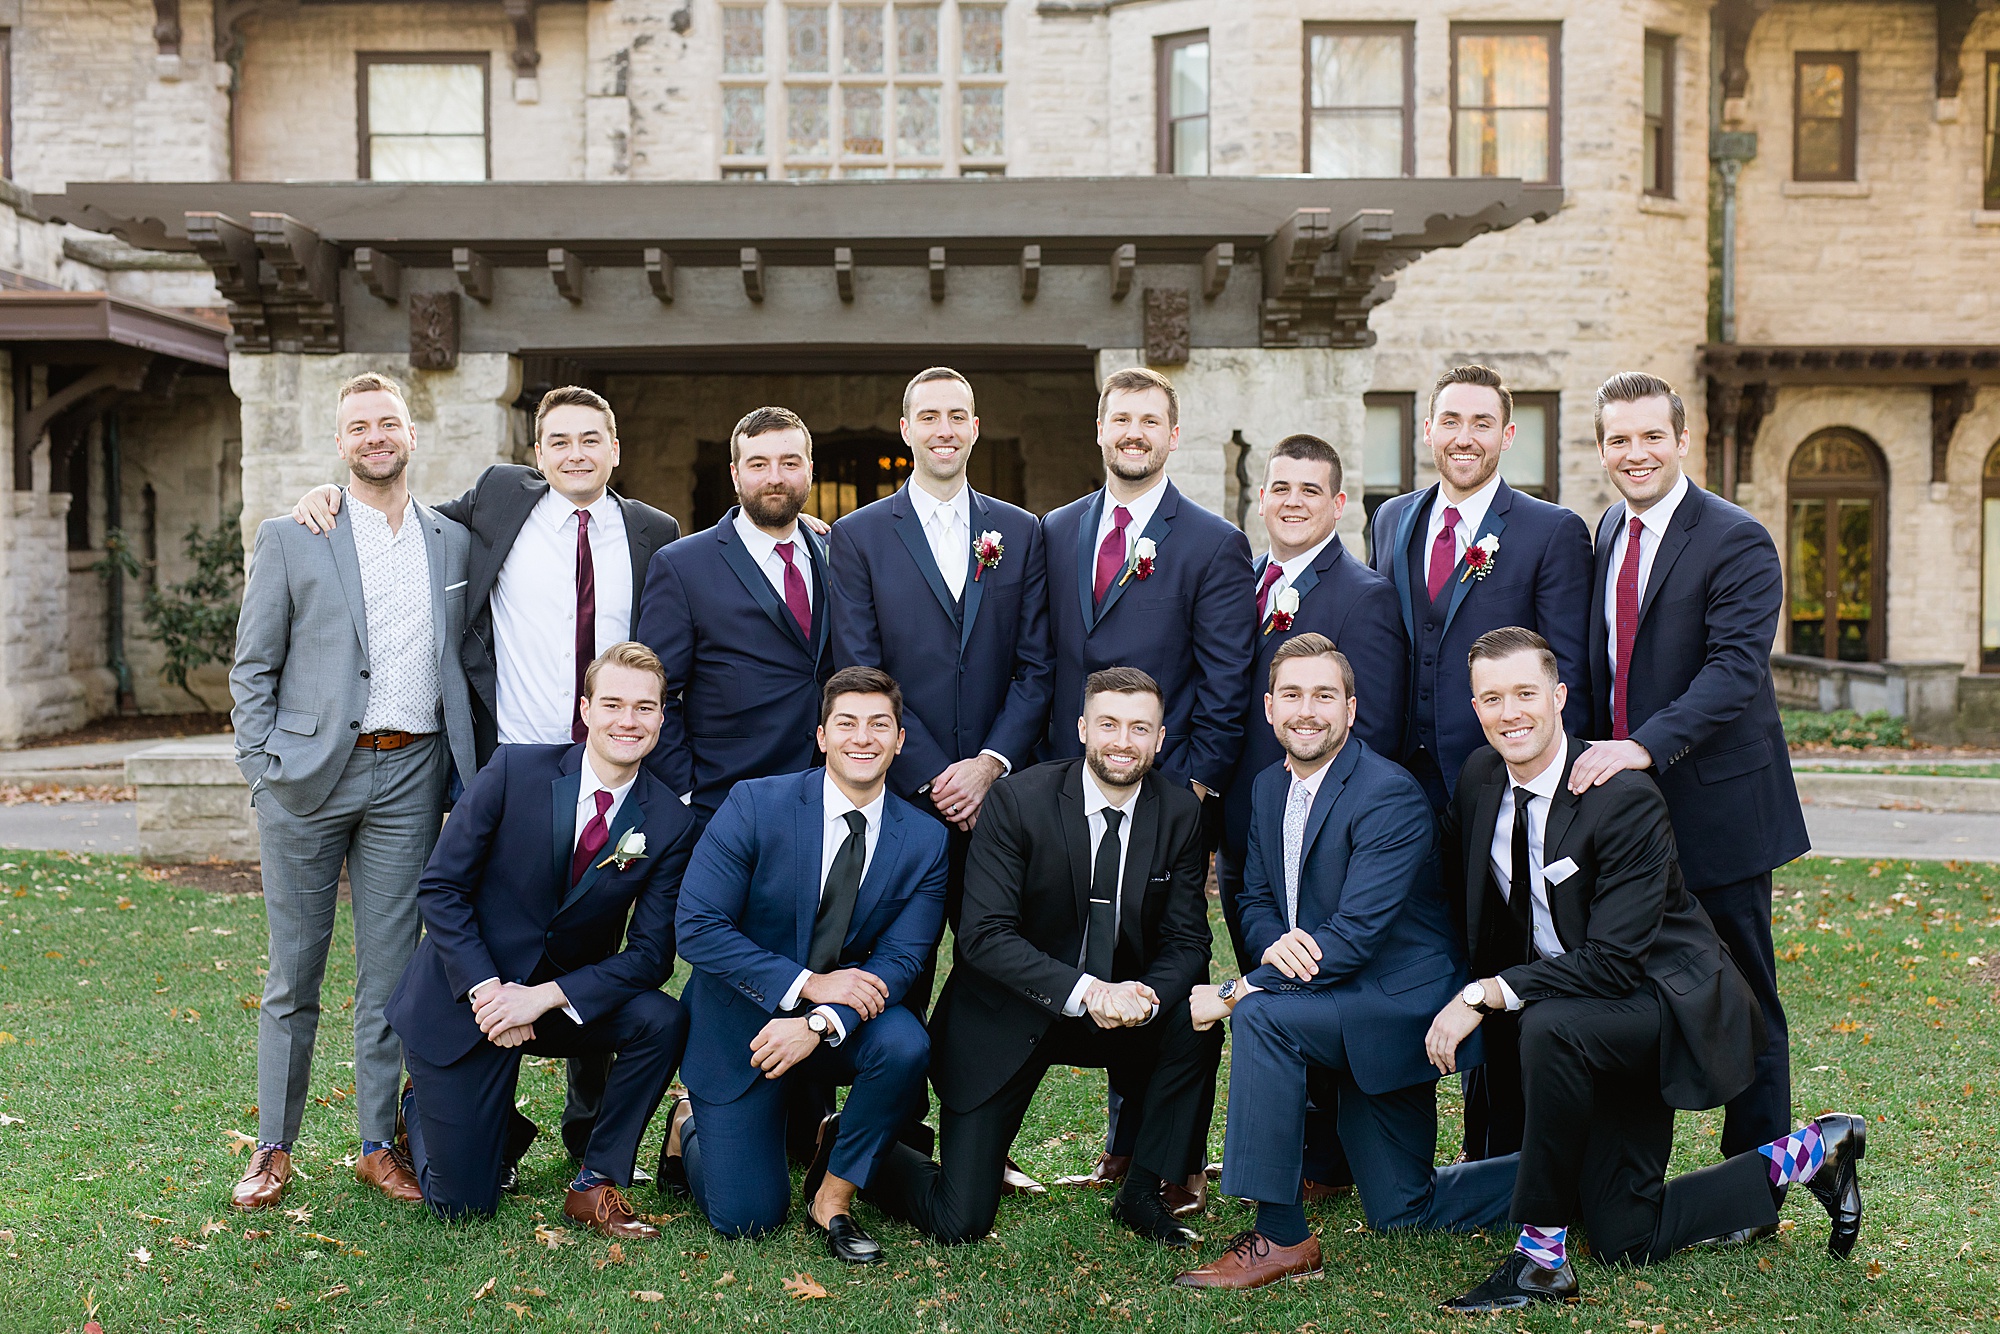 A classic navy and burgundy Fall Dearborn Inn wedding in Dearborn, Michigan by Breanne Rochelle Photography.